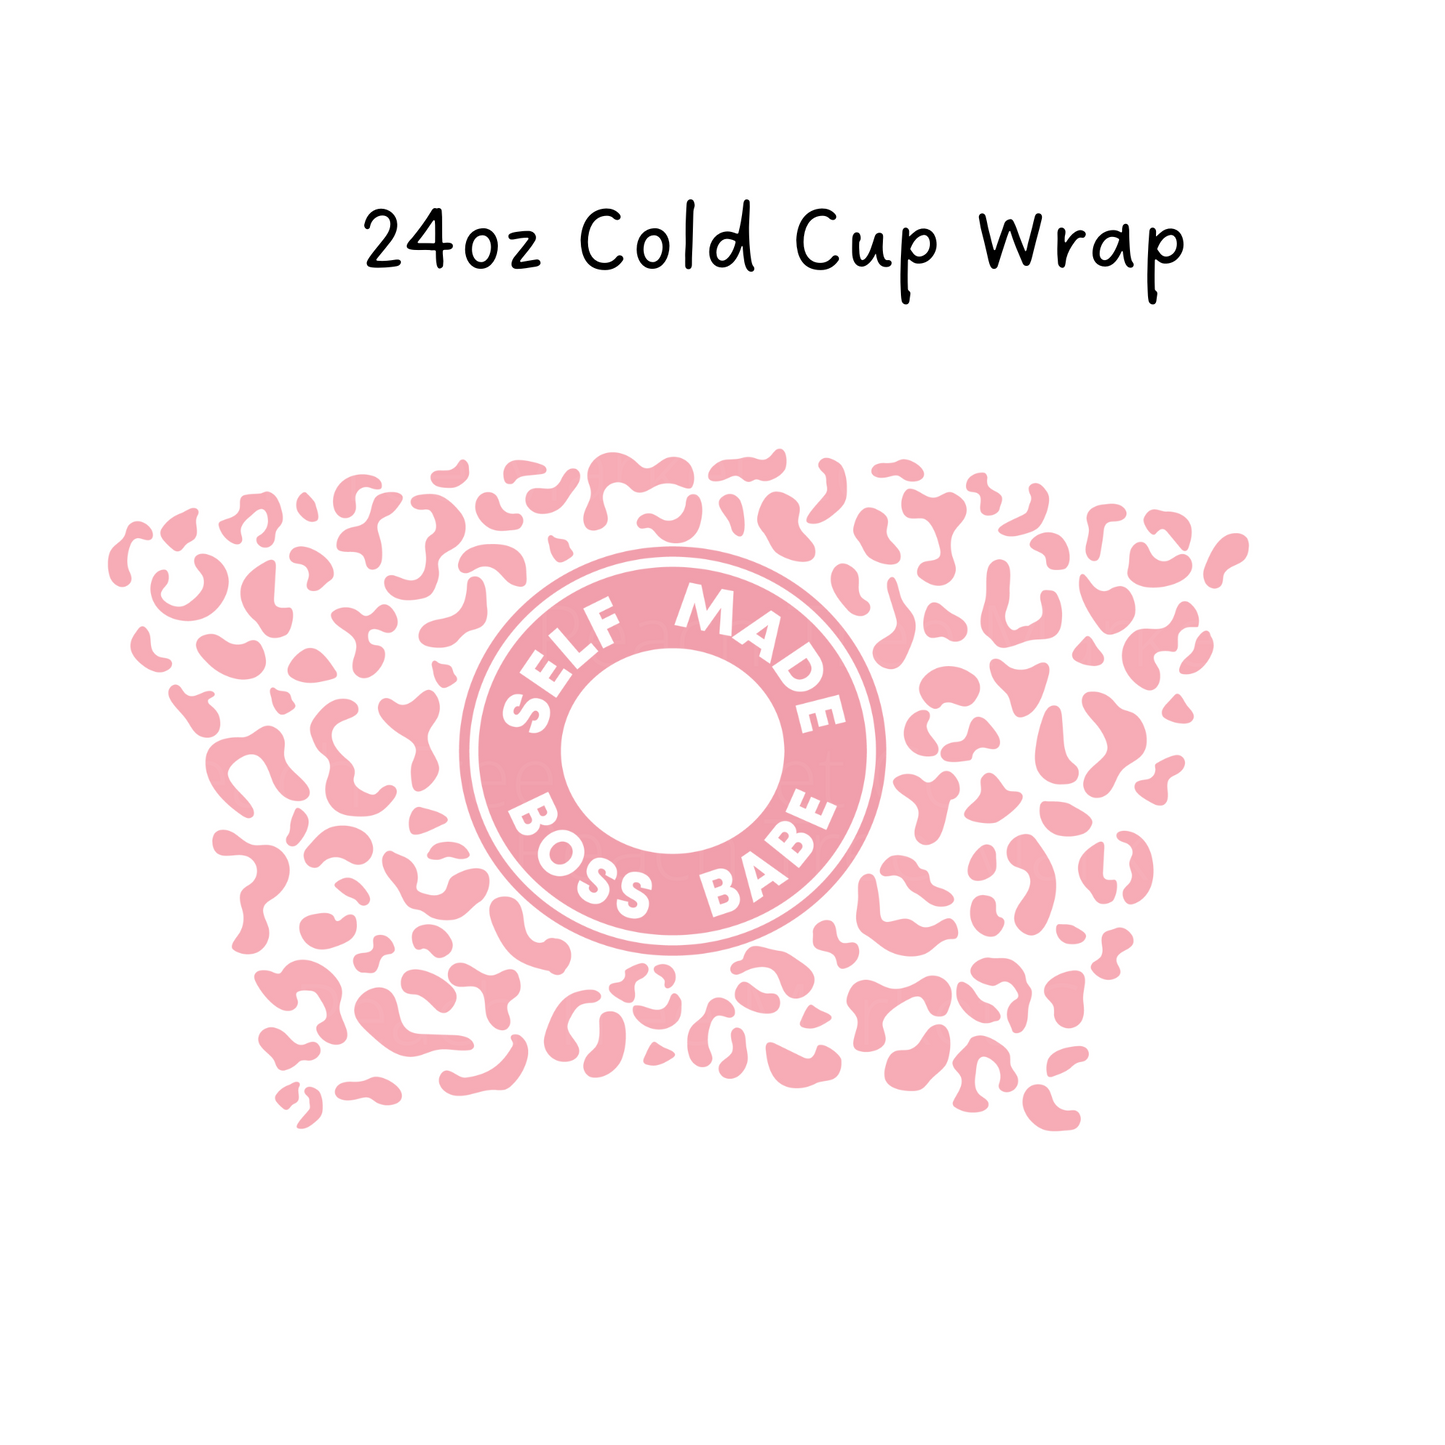 Self Made Cold Cup Wrap